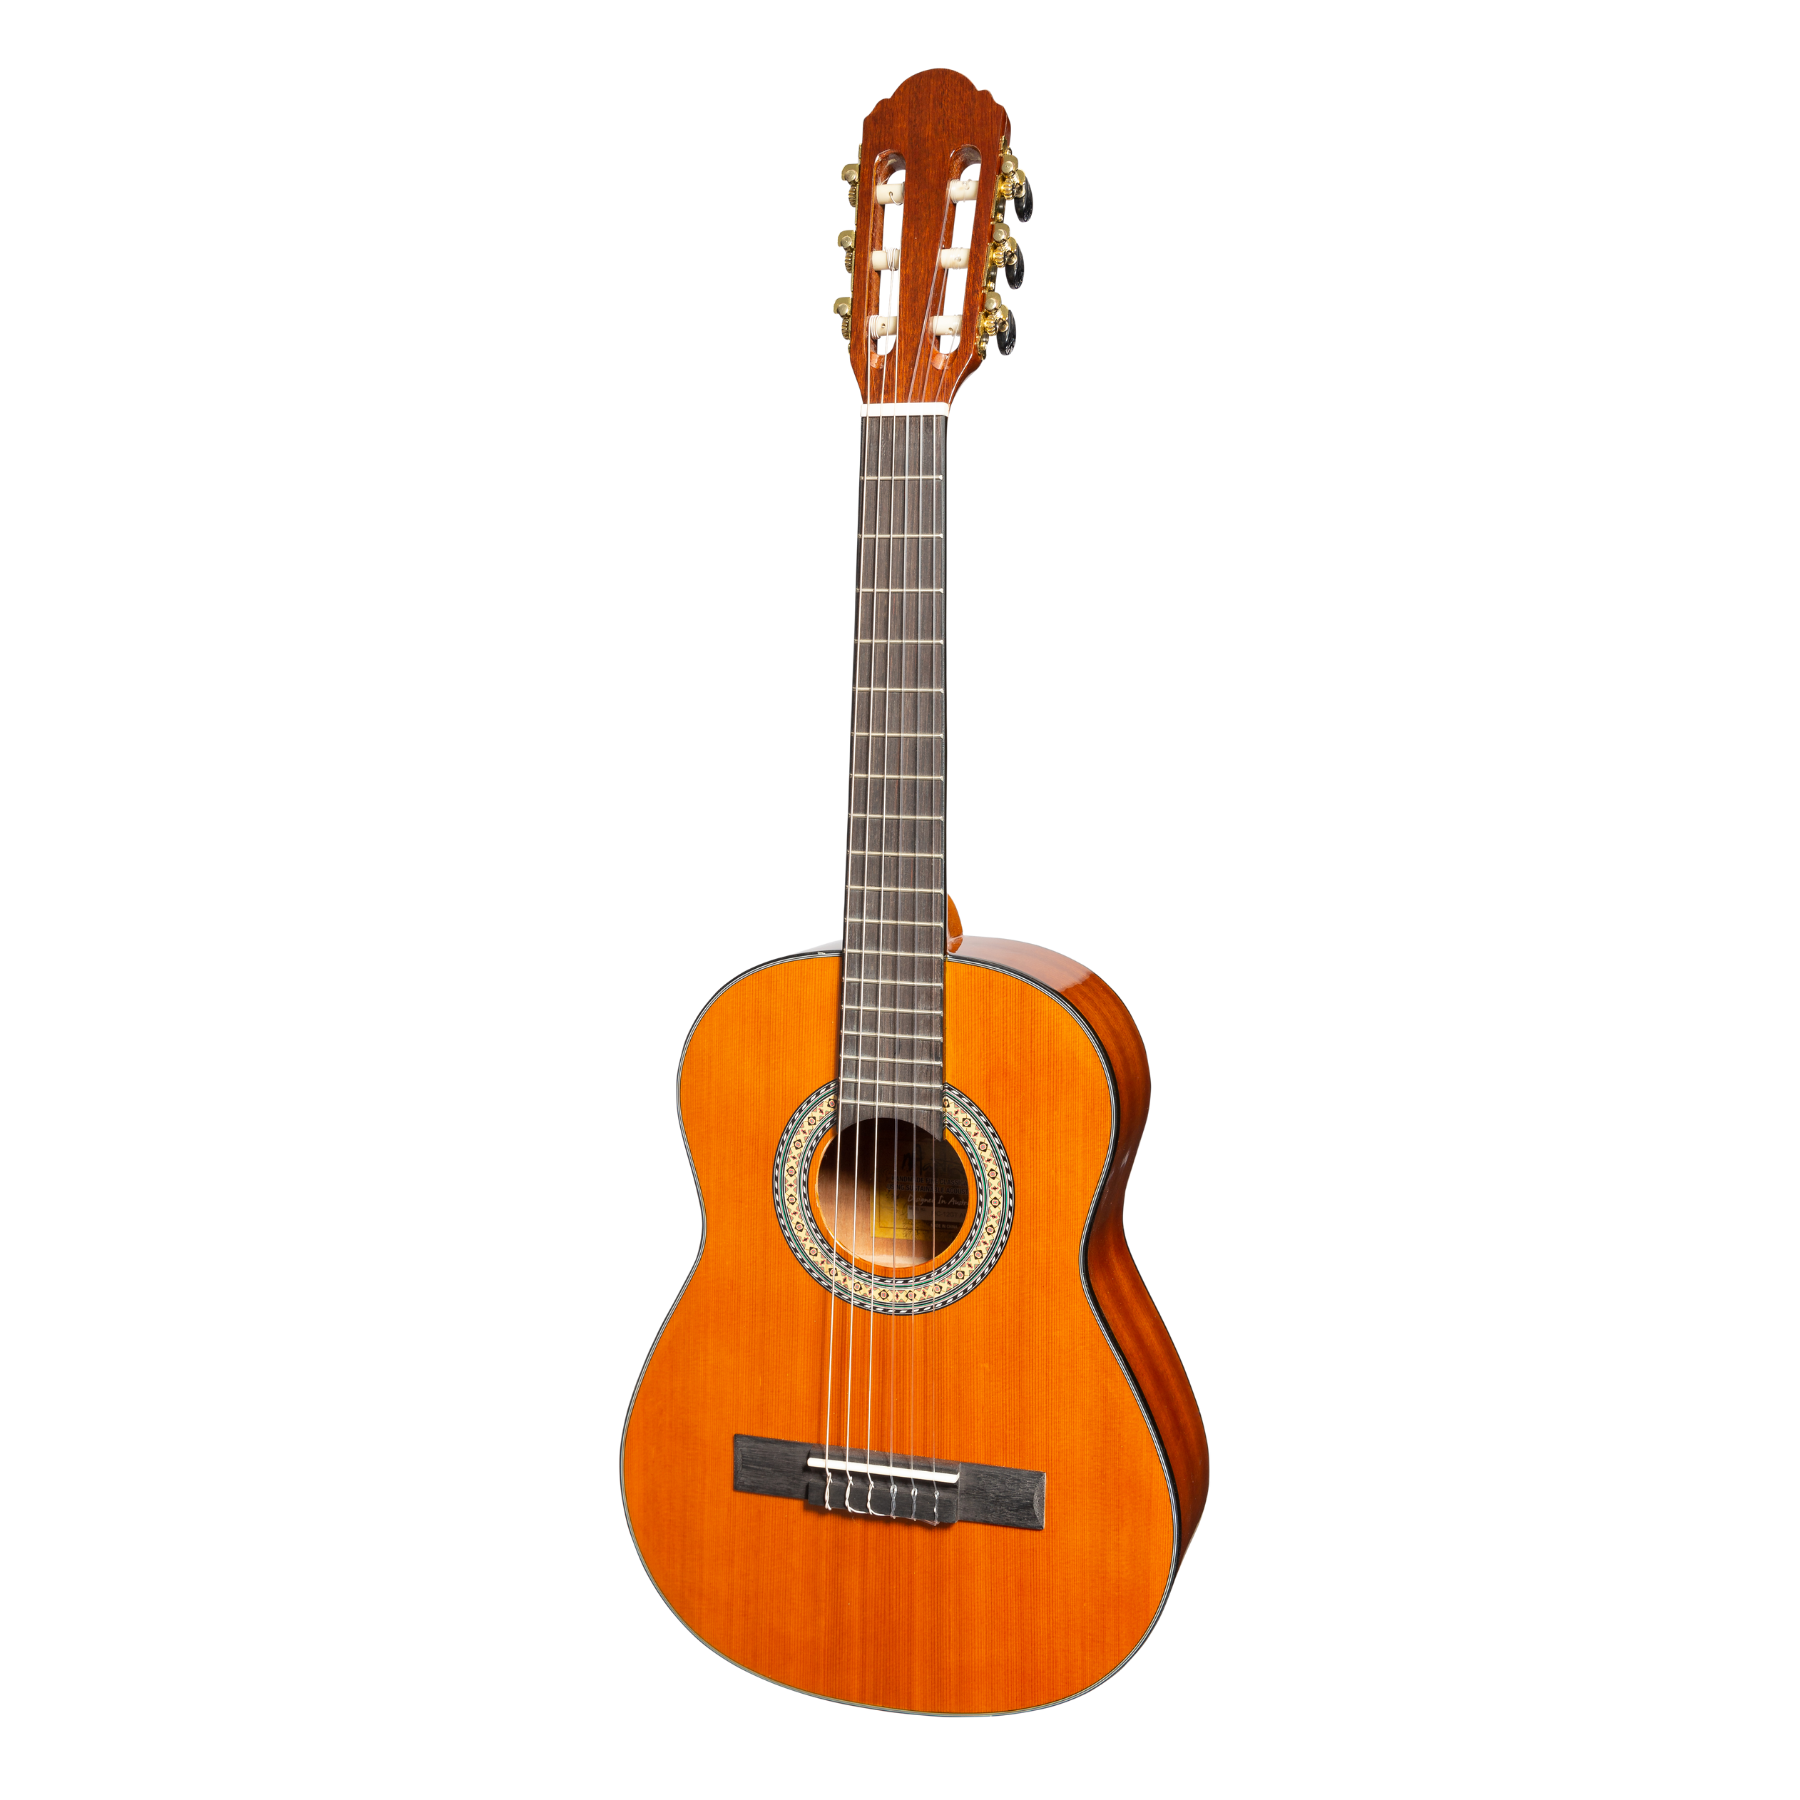 Martinez G-Series 1/2 Size Student Classical Guitar with Built In Tuner (Amber-Gloss)-MC-12GT-AMB